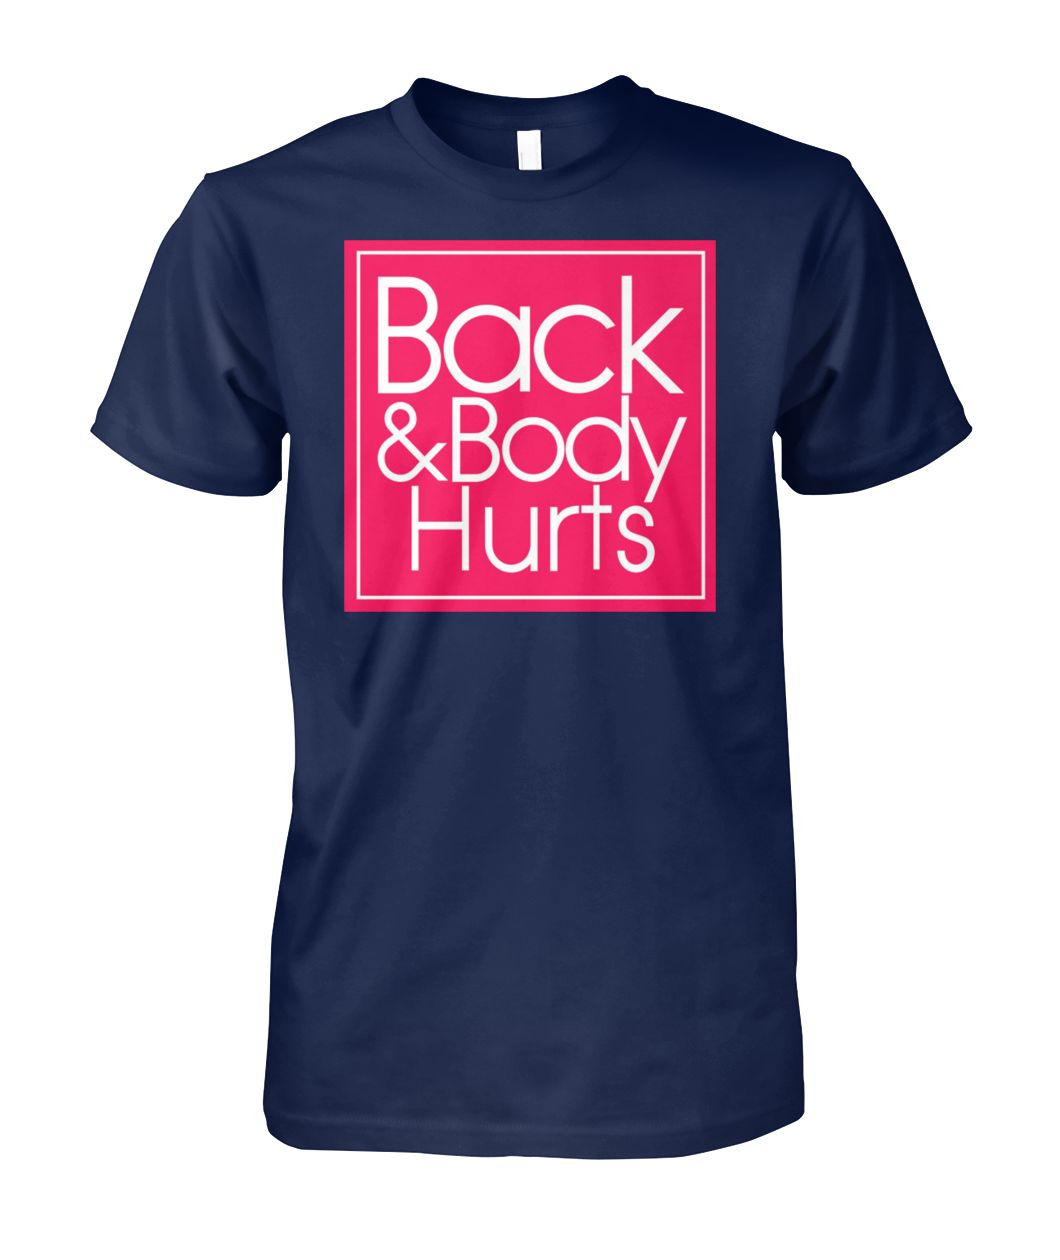 My back and body hurts unisex cotton tee